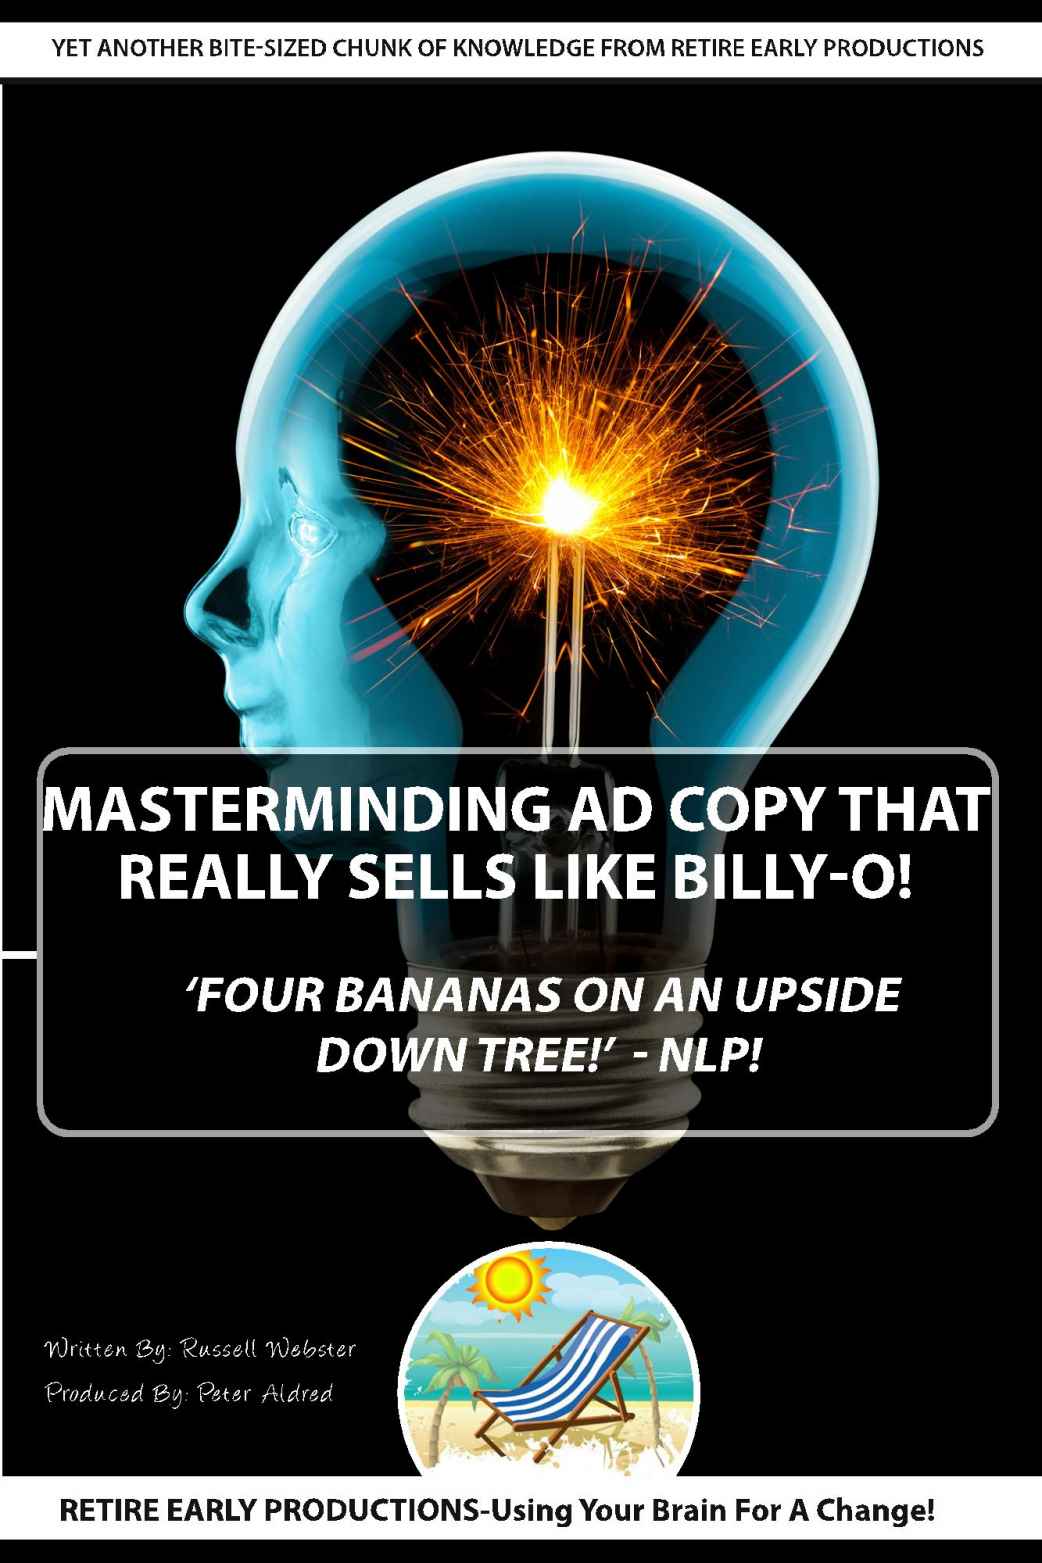 'MasterMinding Ad Copy That Really Sells Like Billy-O!': Four Bananas On An Upside Down Tree -NLP